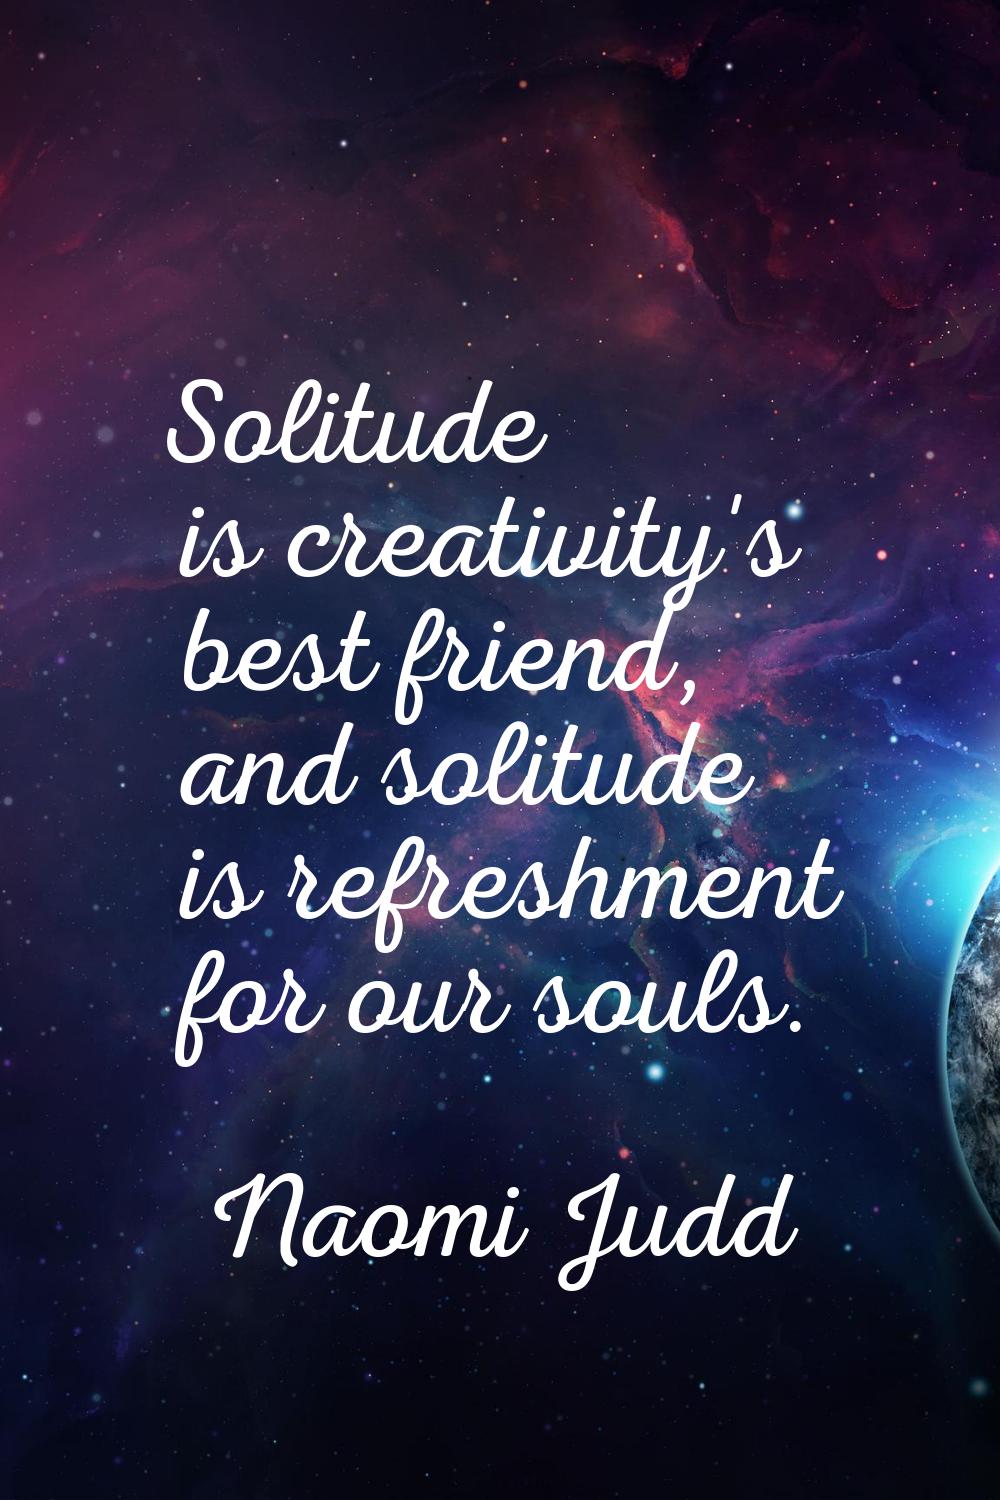 Solitude is creativity's best friend, and solitude is refreshment for our souls.